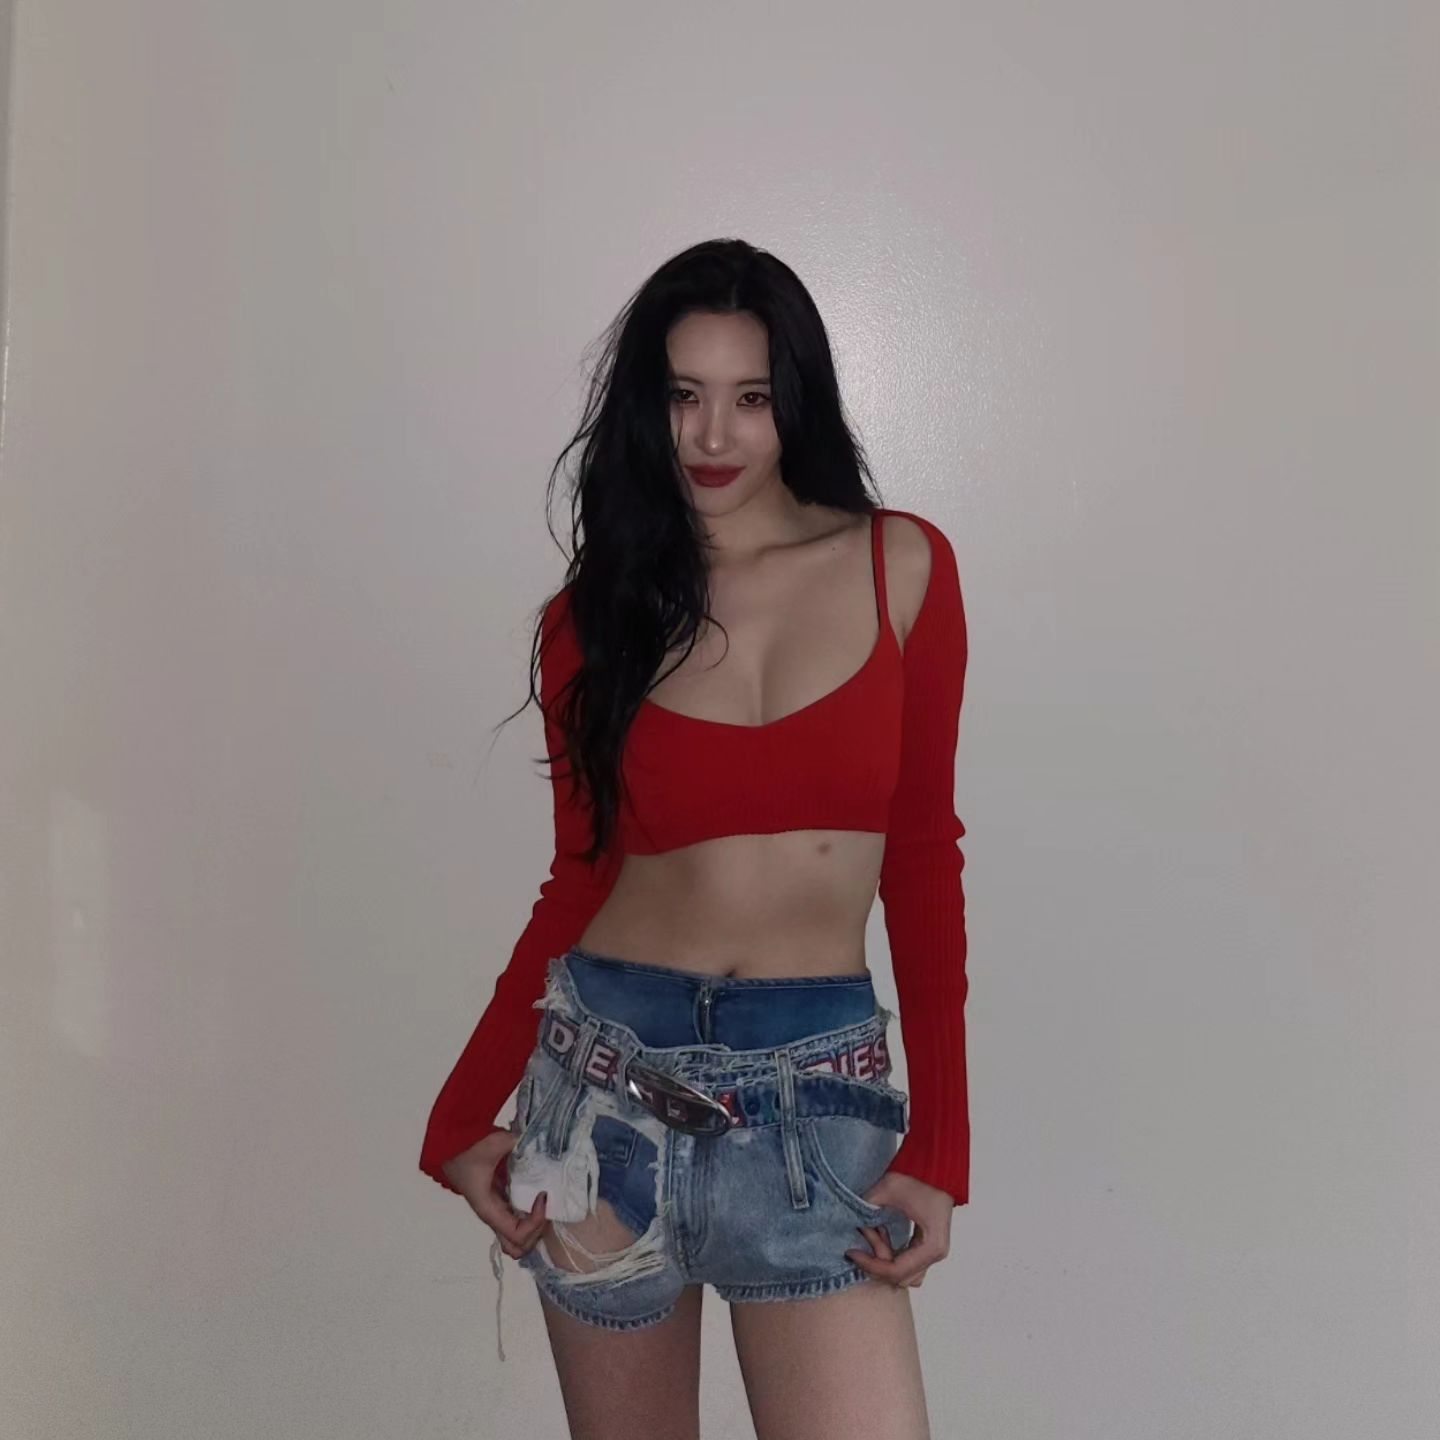 Sunmi, 'surprised' by the sense of volume... Intense sexy with red lip + tank top